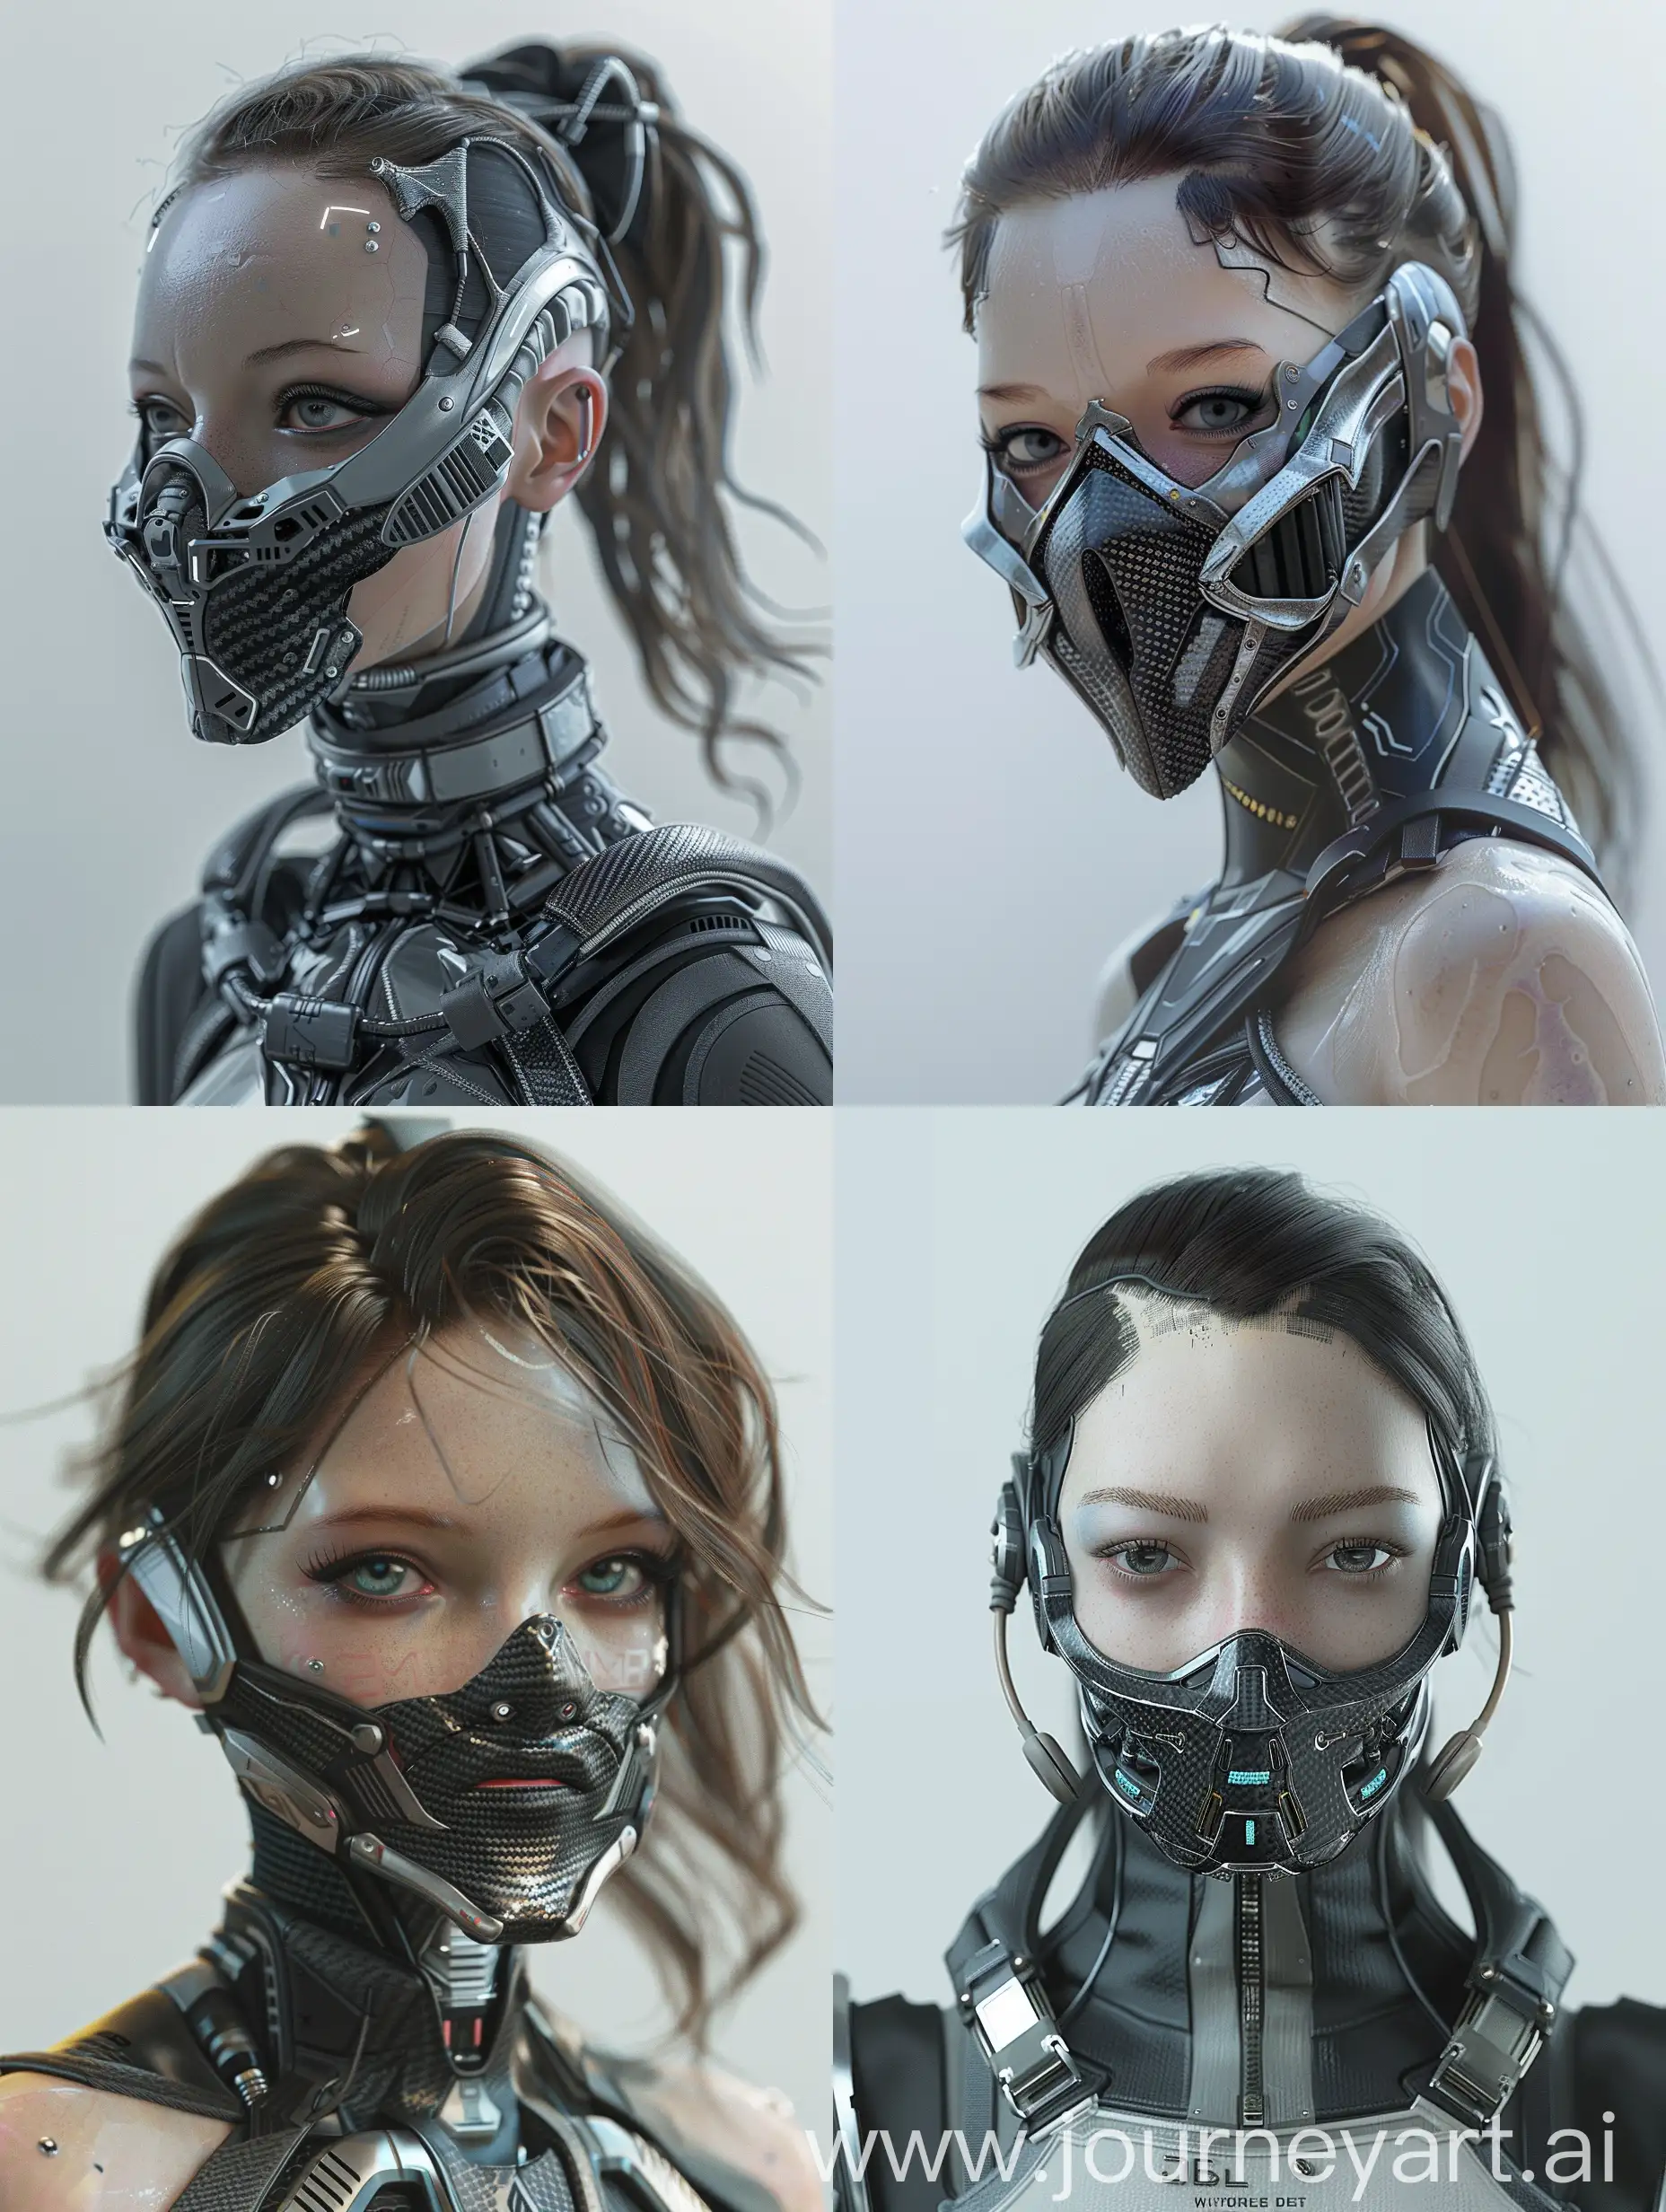 Introducing a captivating character adorned with a cybernetic mouth-covering mask, seamlessly blending cutting-edge technology with intricate details such as carbon fiber textures and aluminum accents. This mask, meticulously crafted to cover only the mouth, epitomizes the perfect fusion of advanced cybernetic enhancements with futuristic elegance. Symbolizing the delicate equilibrium between humanity and machine, her appearance embodies the essence of a futuristic cyberpunk aesthetic. With dynamic poses that exude confidence and mystery, she captivates the viewer with her cybernetic grace, adding depth and personality to the futuristic narrative.